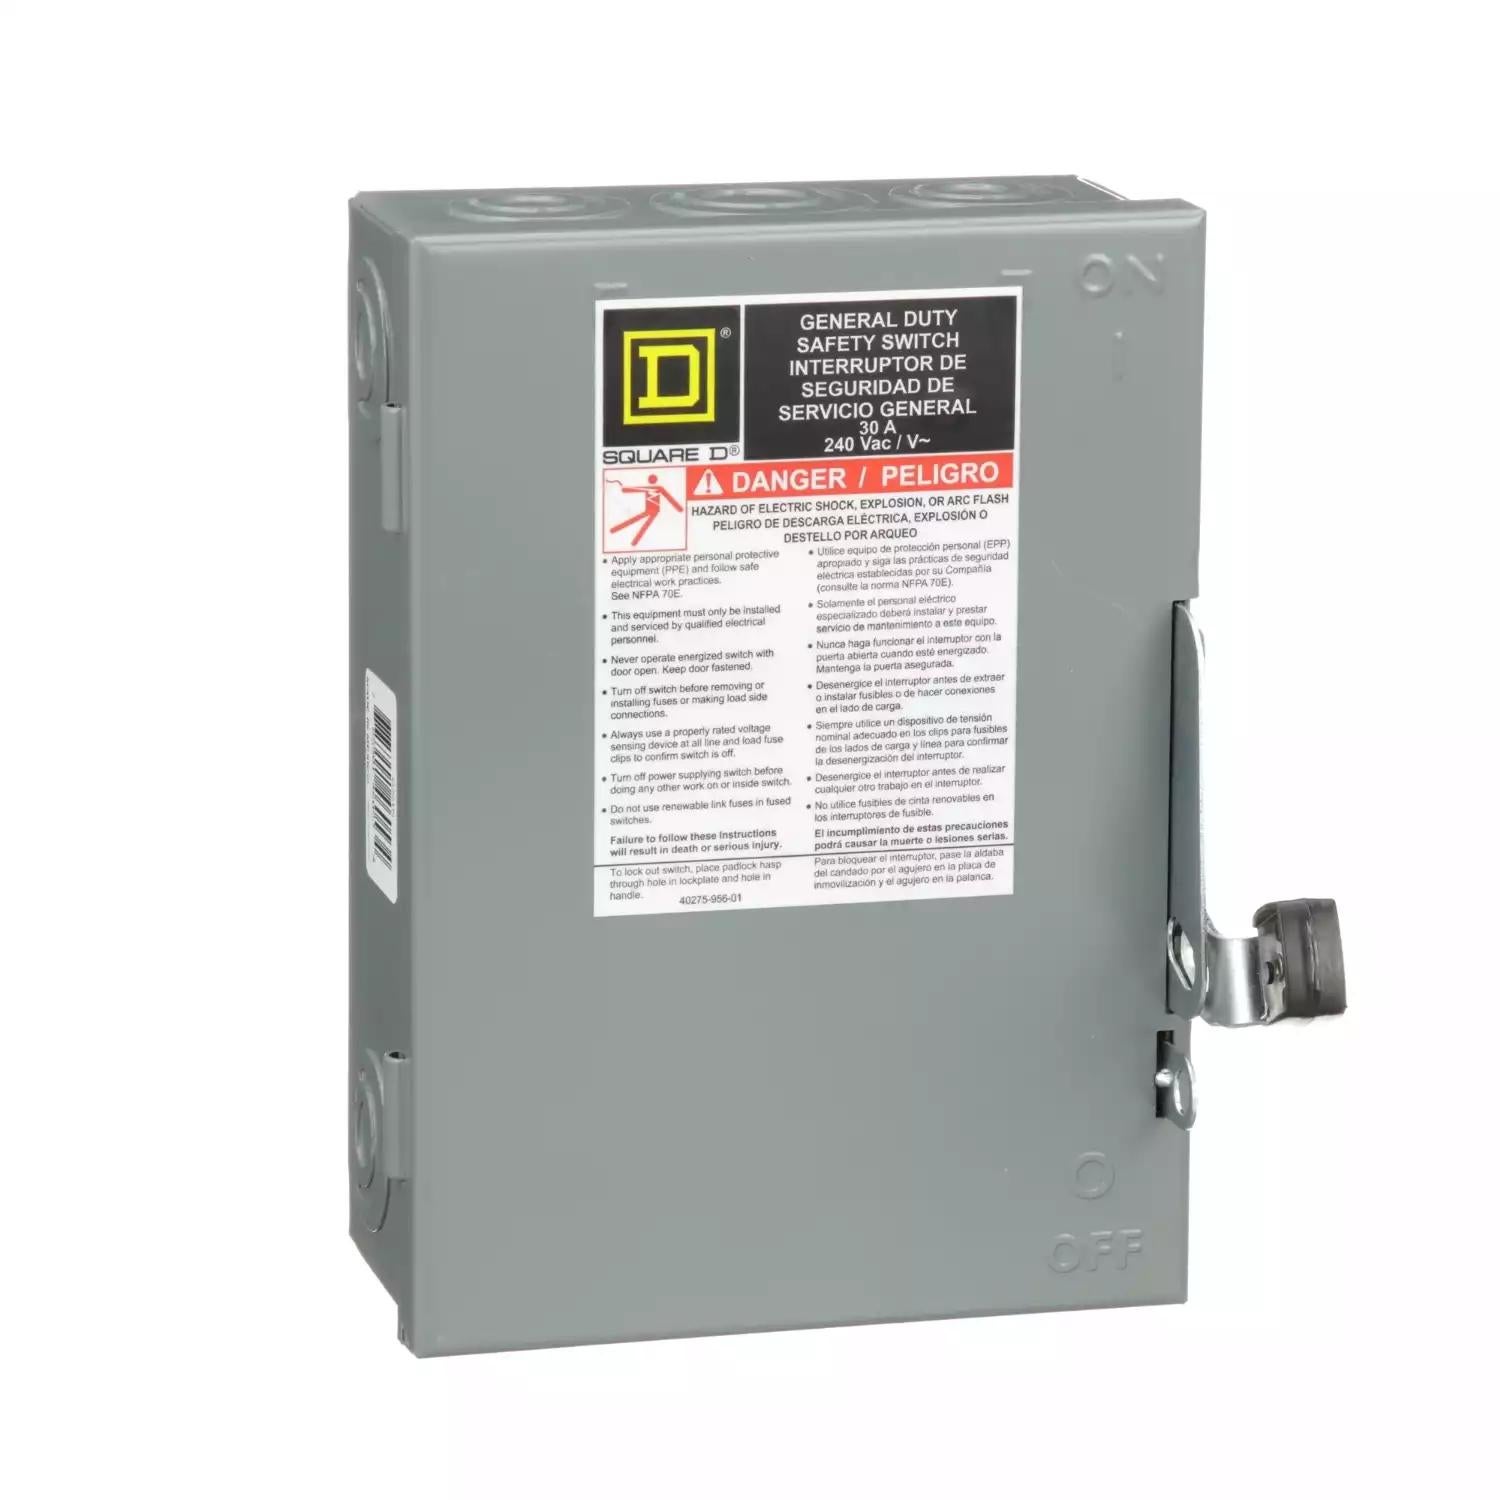 Safety switch, general duty, fusible, 30A, 2 poles, 7.5 hp, 120 VAC, NEMA 1, neutral factory installed